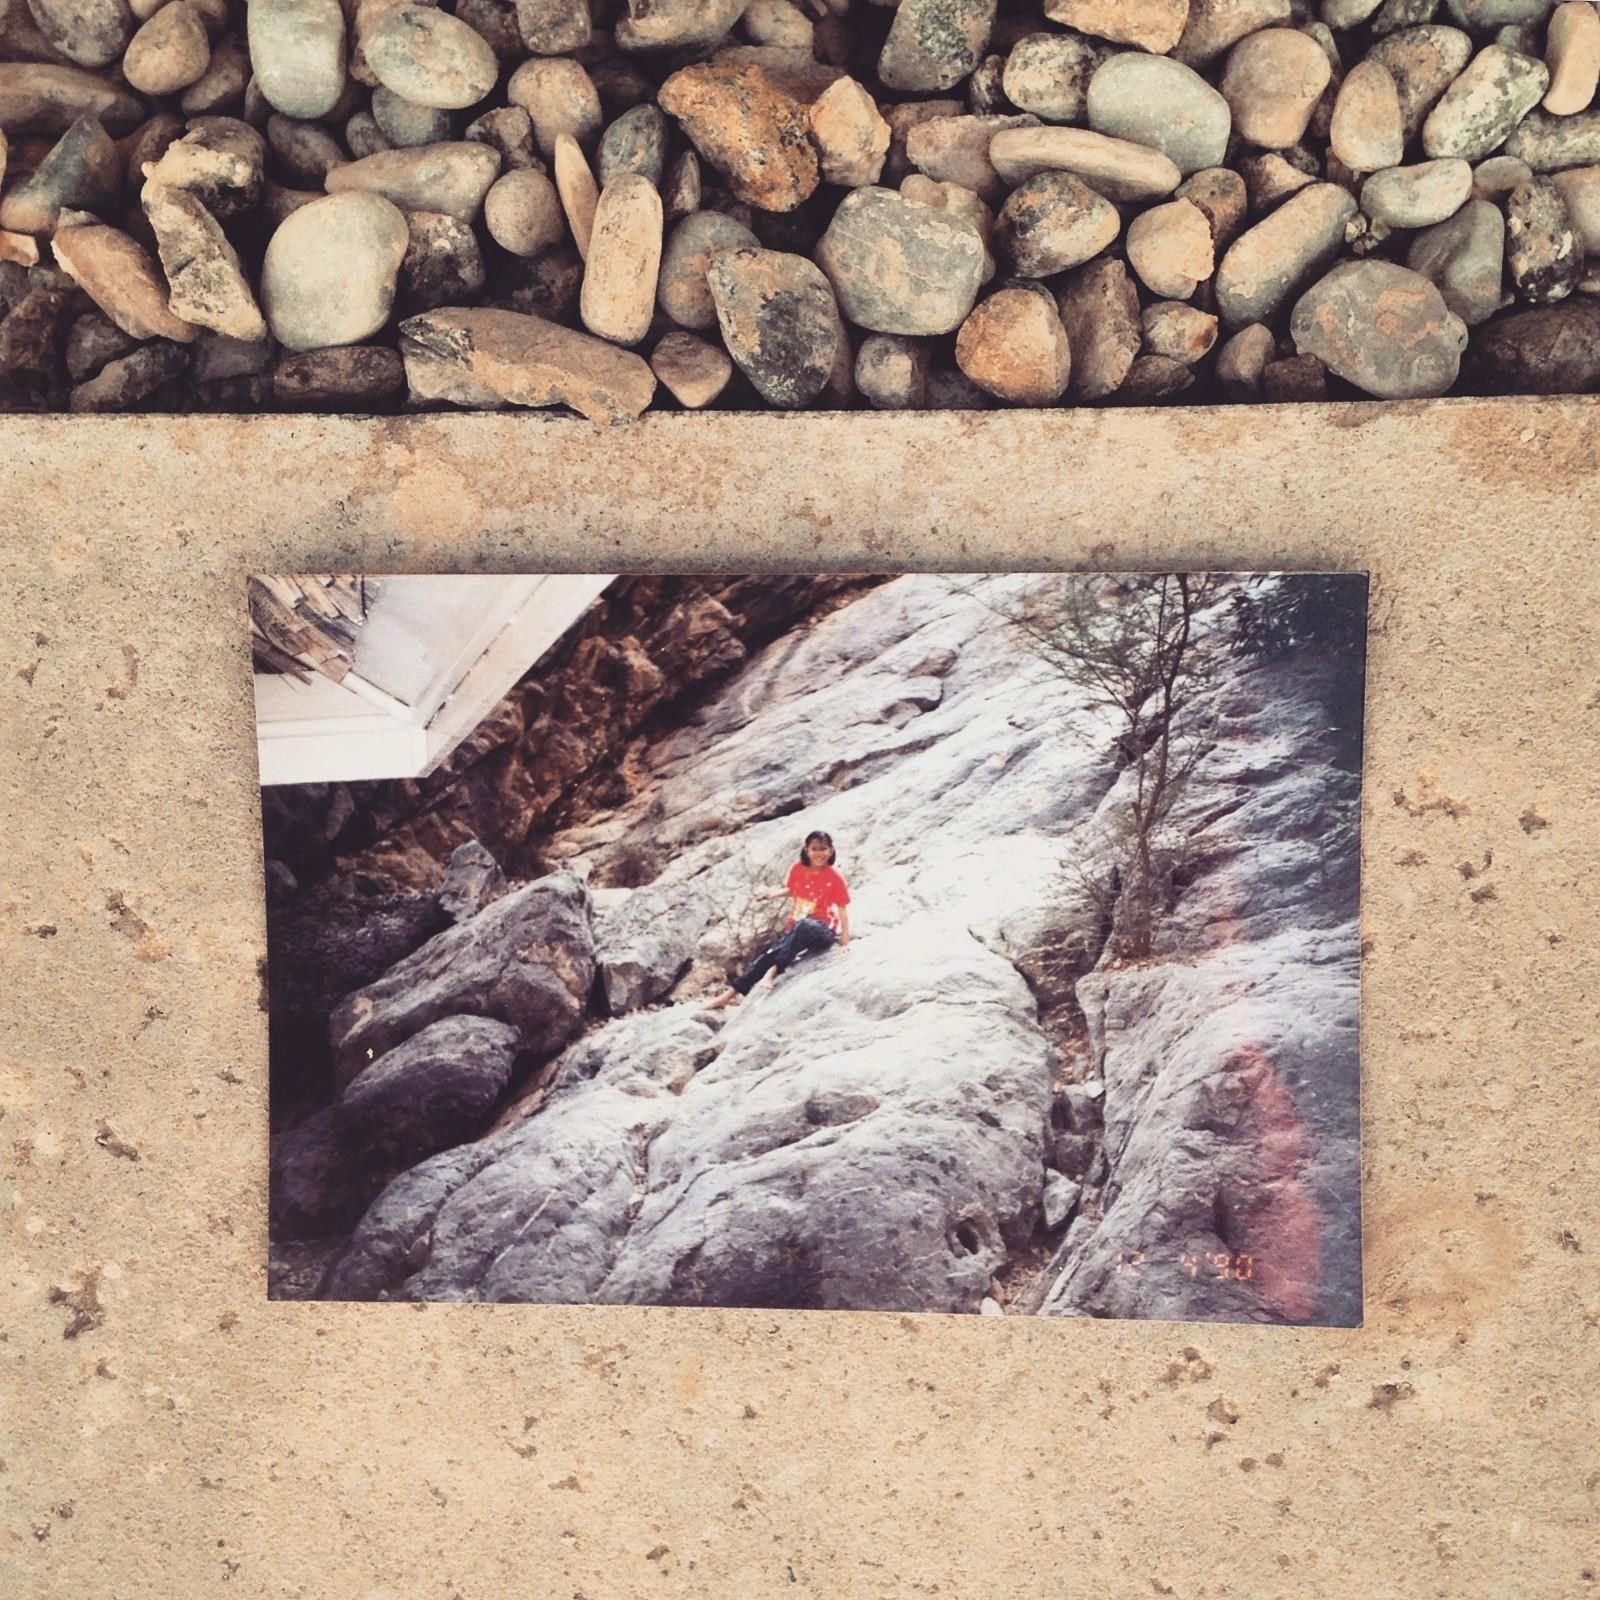 Image of a photograph featuring a girl lying on top of rocks.